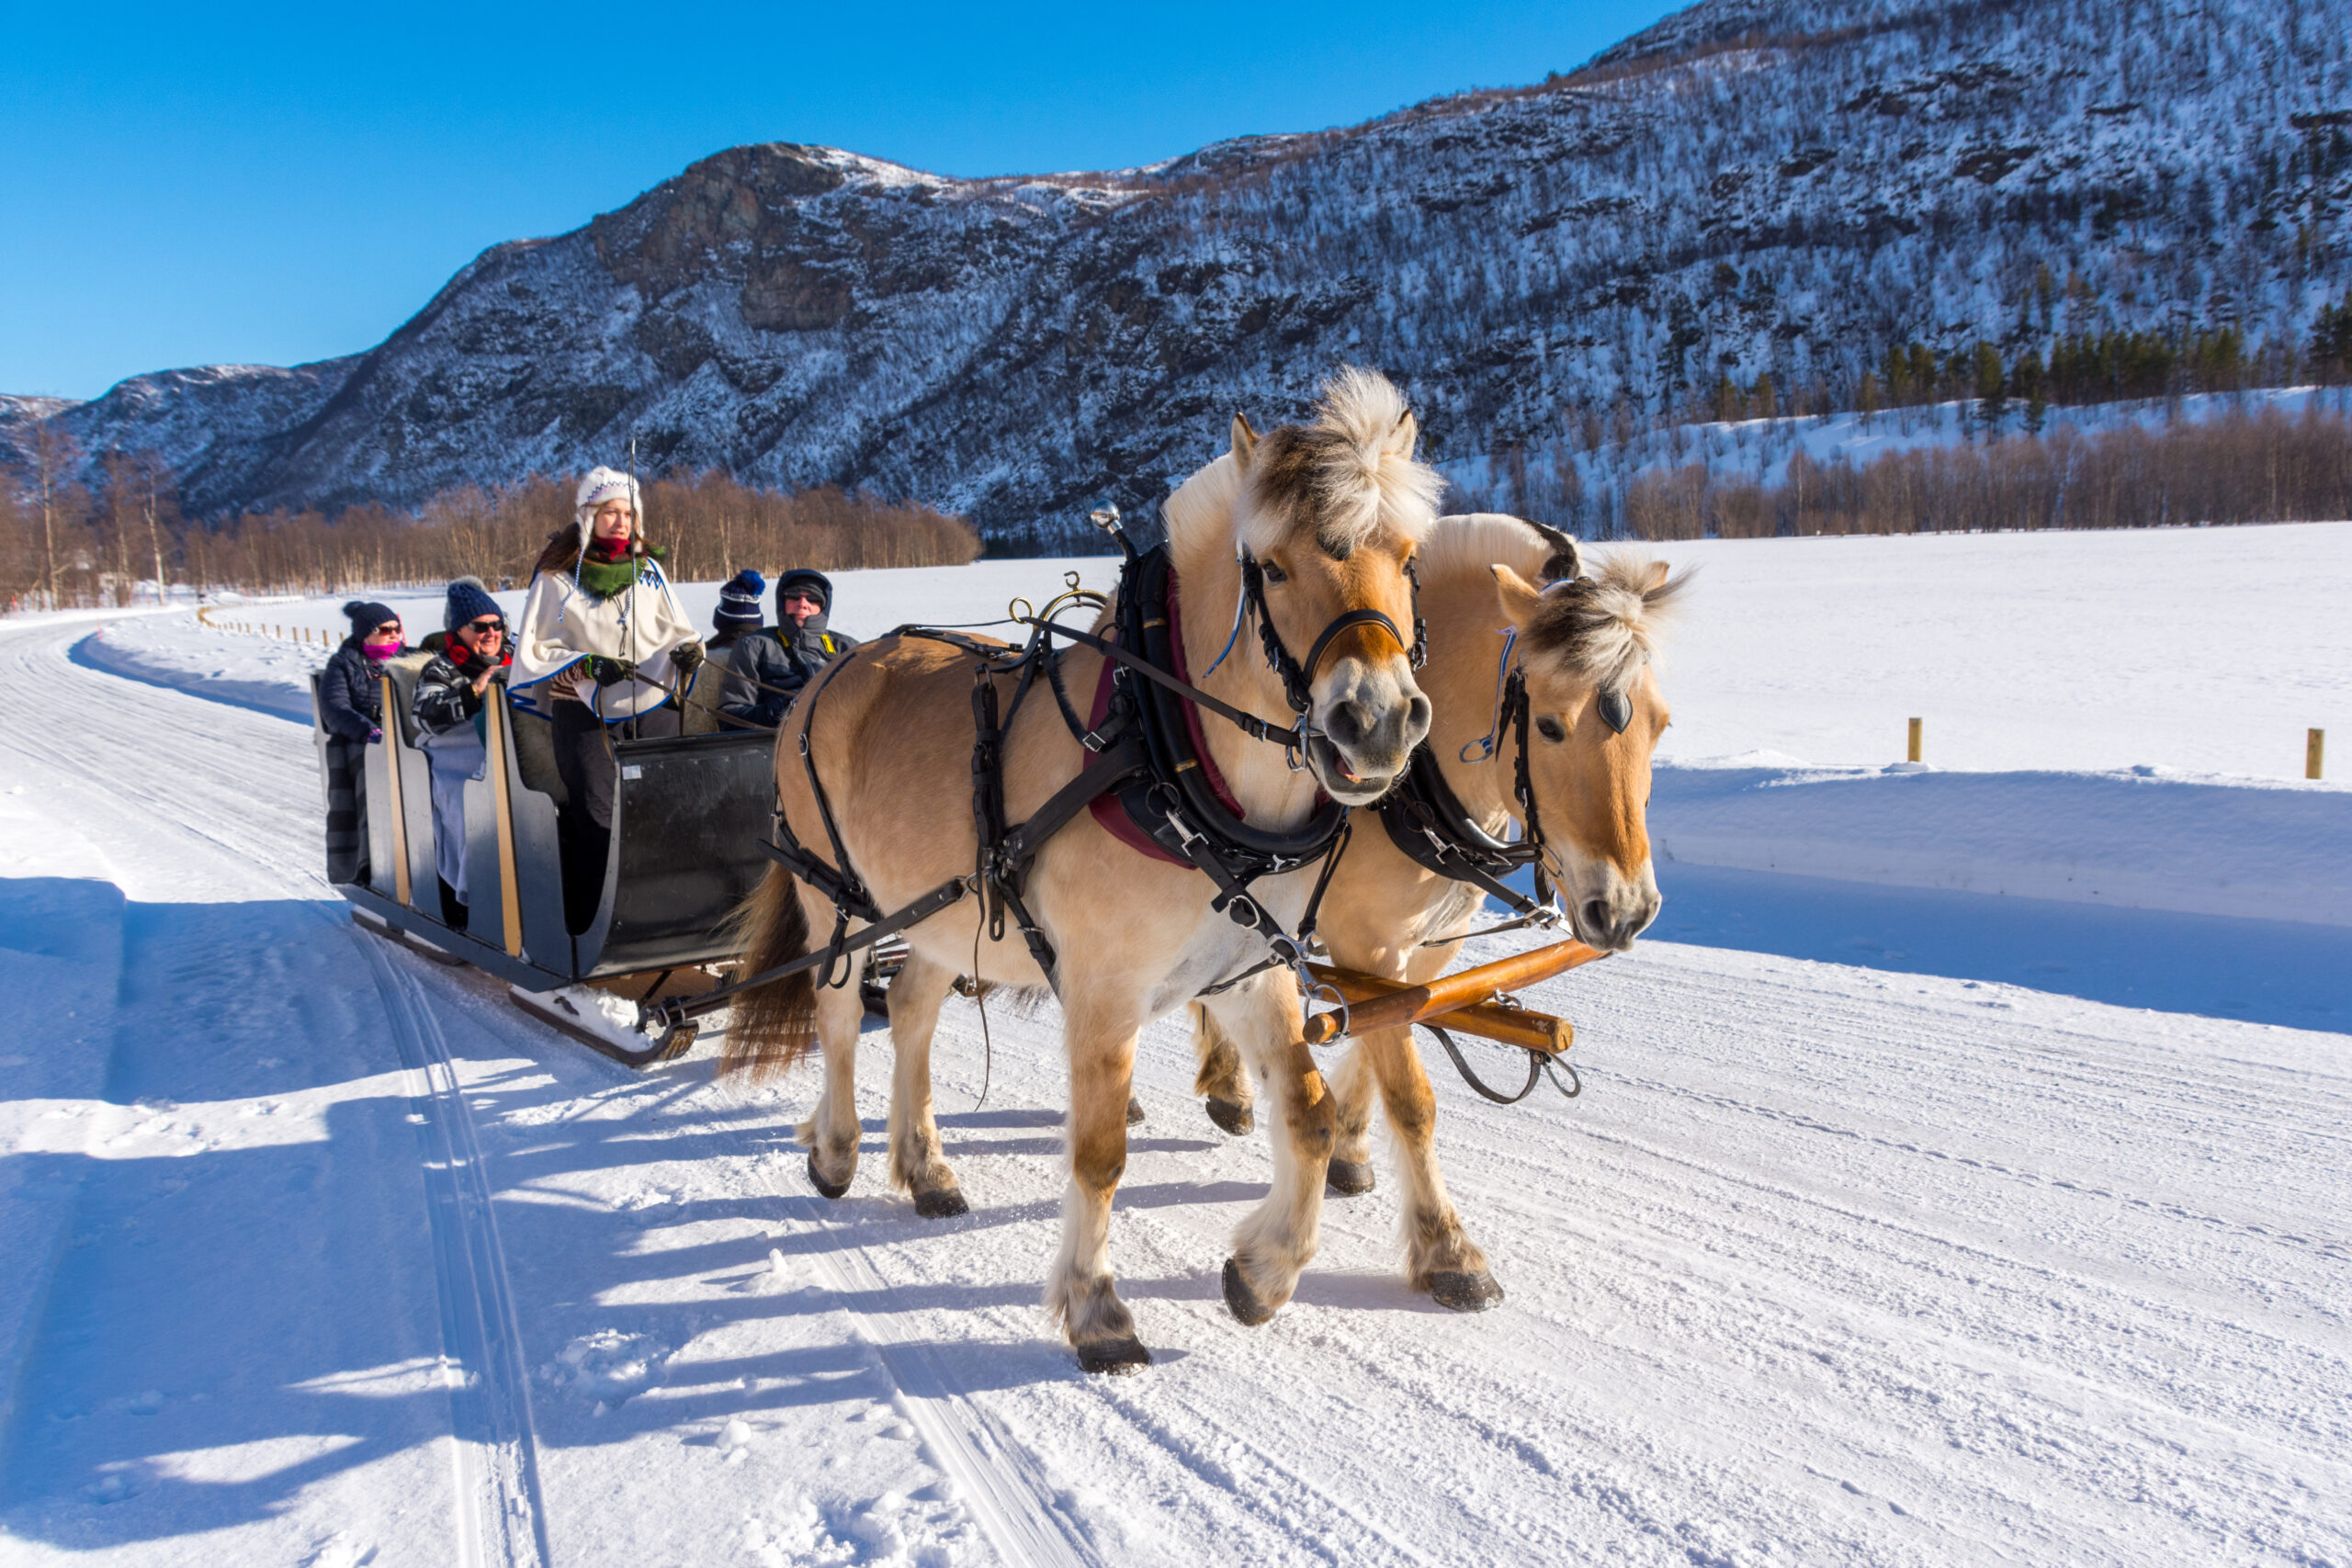 Fjord Horse: Two Fjords pull the sleigh